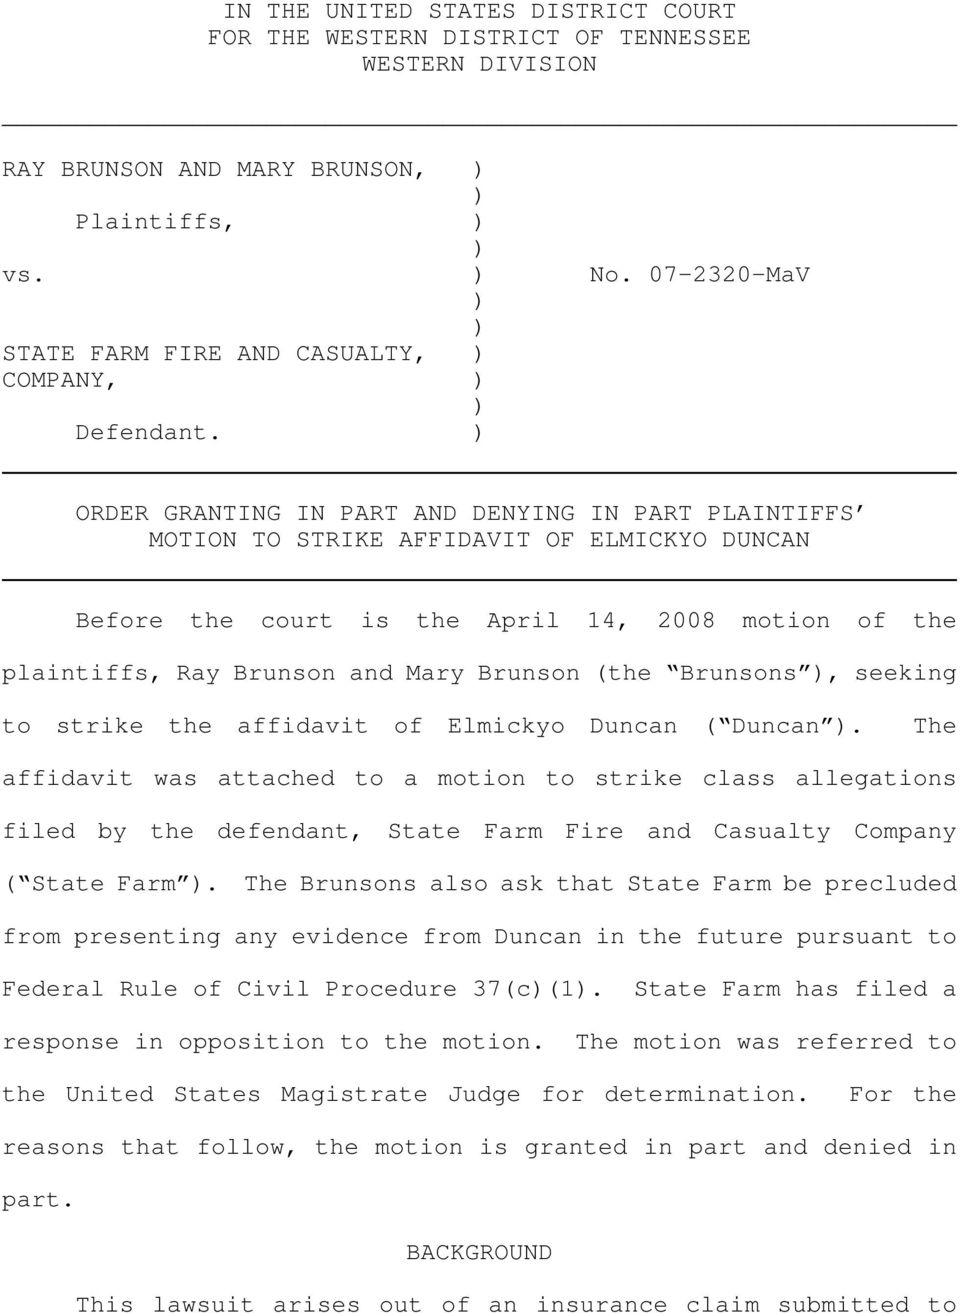 ORDER GRANTING IN PART AND DENYING IN PART PLAINTIFFS MOTION TO STRIKE AFFIDAVIT OF ELMICKYO DUNCAN Before the court is the April 14, 2008 motion of the plaintiffs, Ray Brunson and Mary Brunson (the